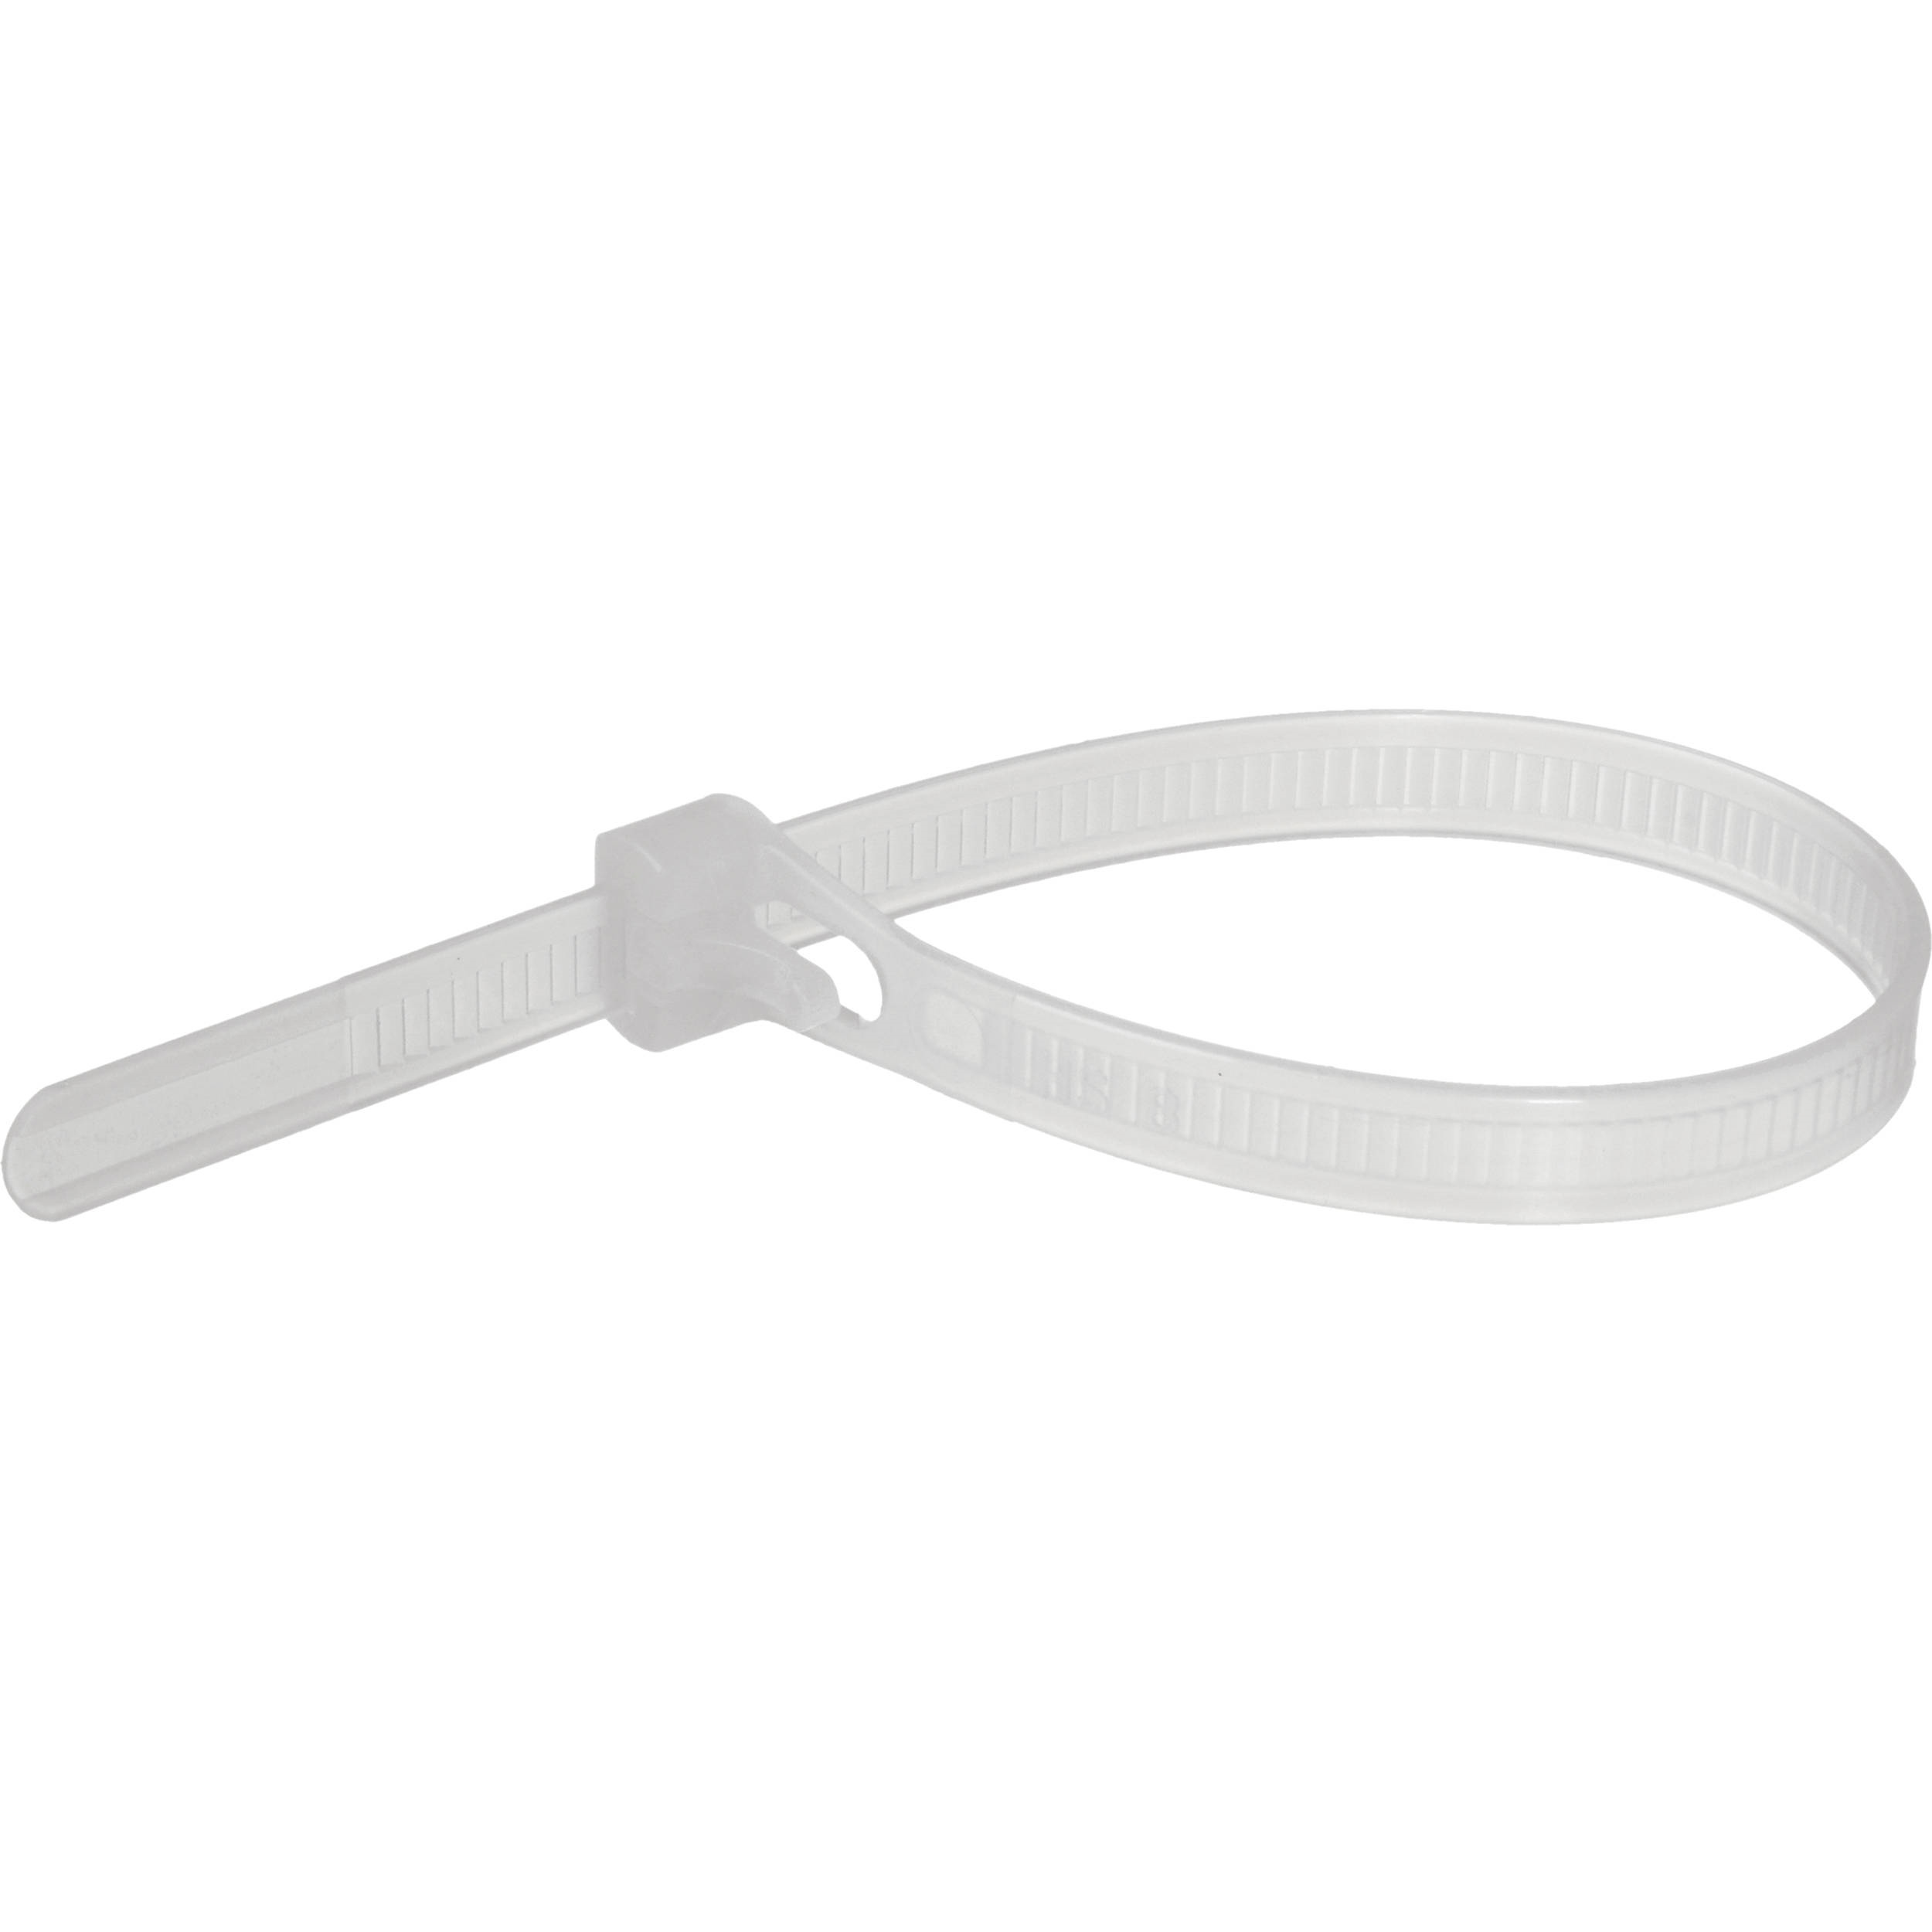 Pearstone 12" Reusable Plastic Cable Ties - Clear (20-Pack)